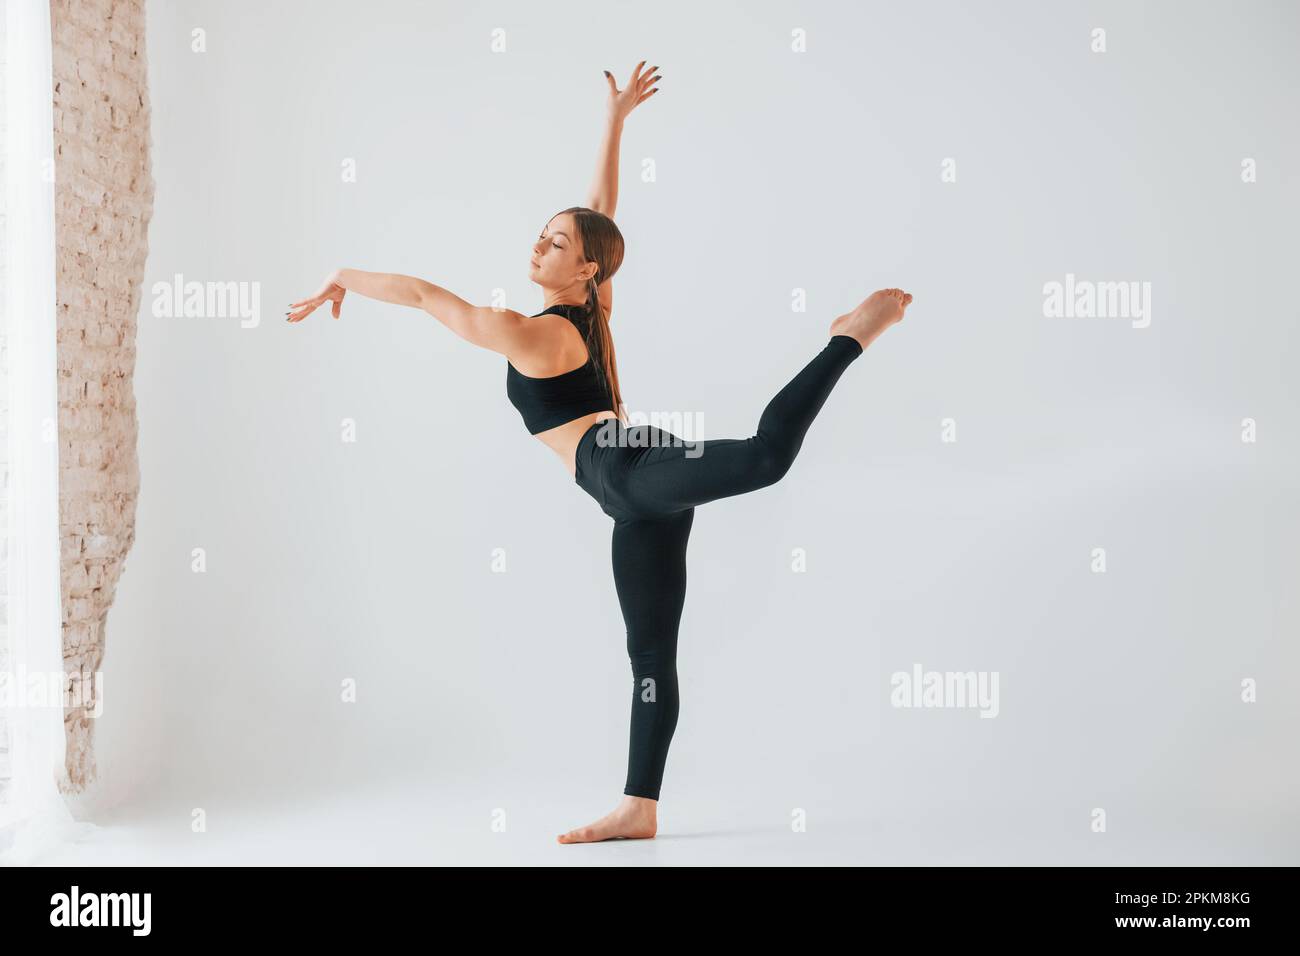 In the studio against white background. Young woman in sportive clothes doing gymnastics indoors. Stock Photo